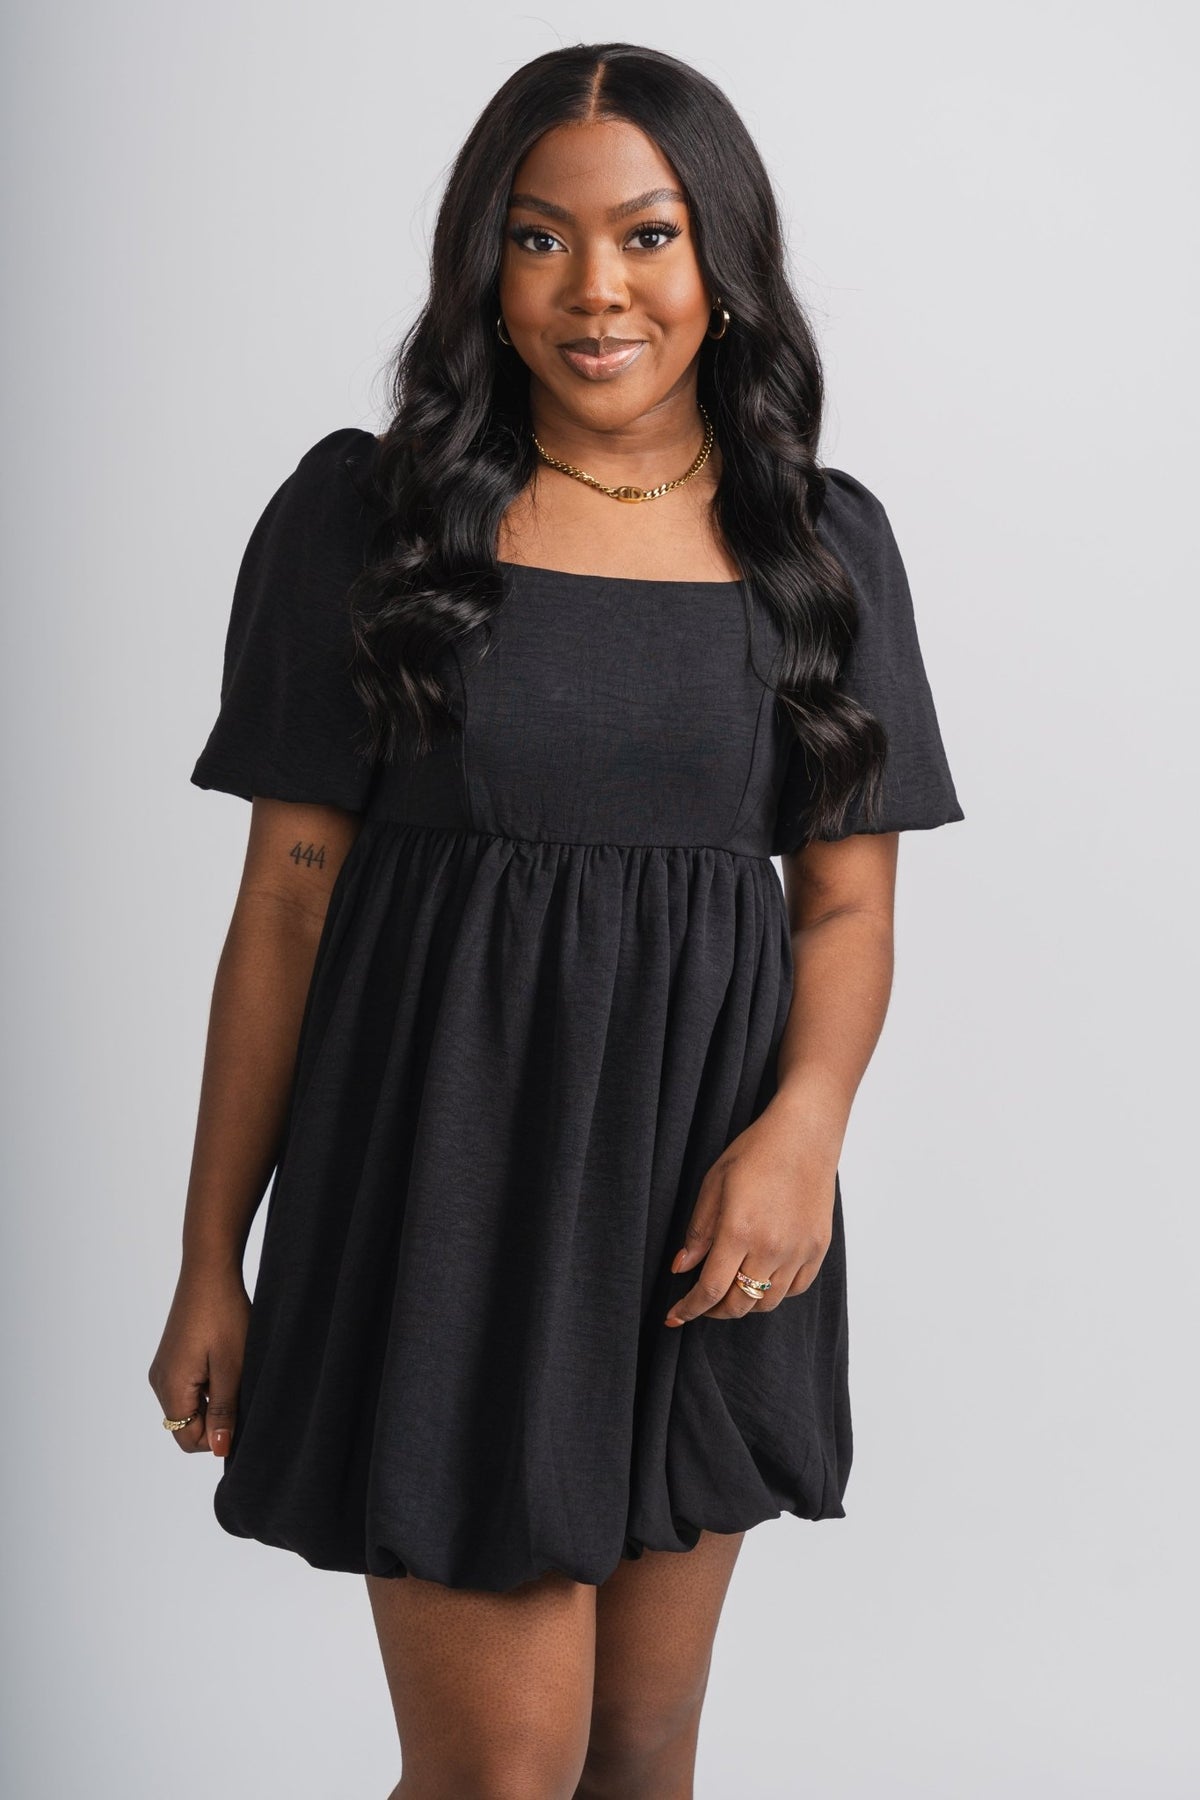 Puff sleeve dress black - Cute dress - Trendy Dresses at Lush Fashion Lounge Boutique in Oklahoma City